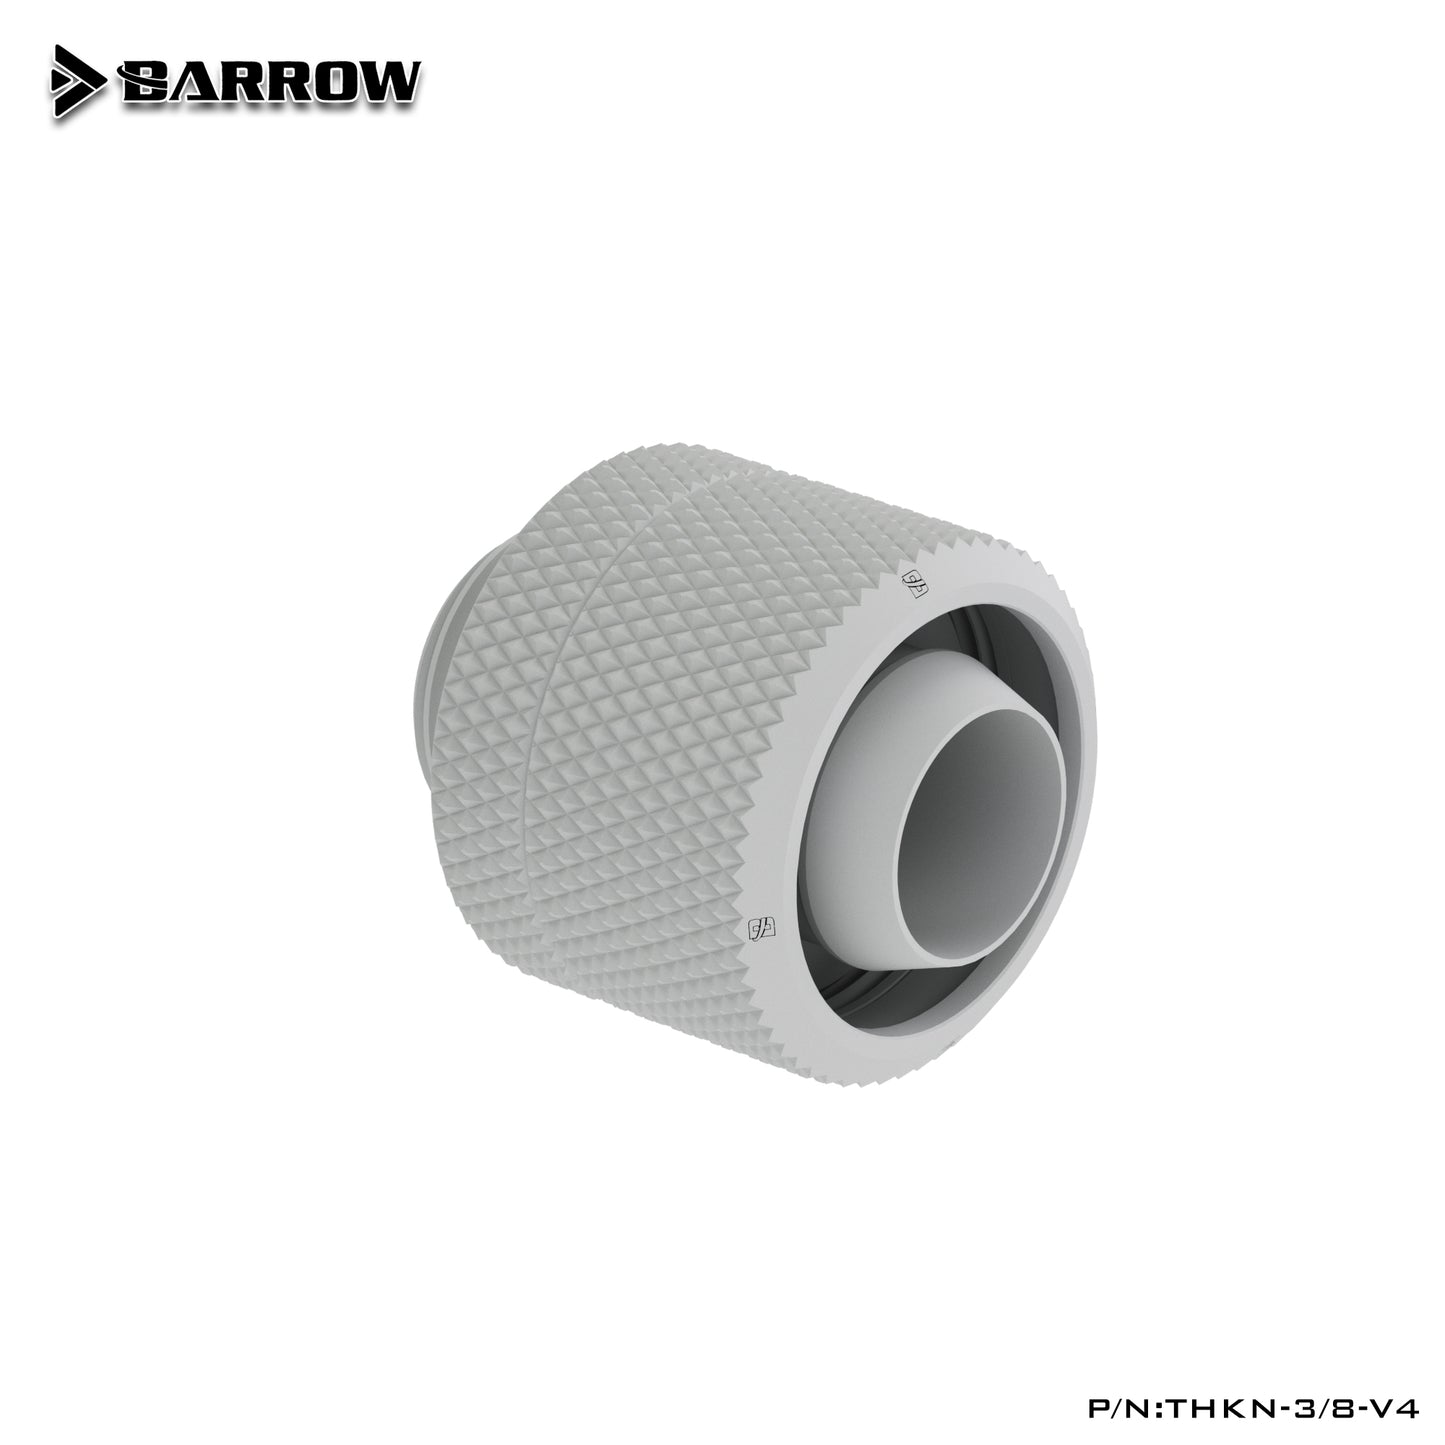 Barrow 10x16mm Soft Tube Fitting, 3/8"ID*5/8"OD G1/4" Compression Connector, Water Cooling Soft Tubing Compression Adapter, THKN-3/8-V4